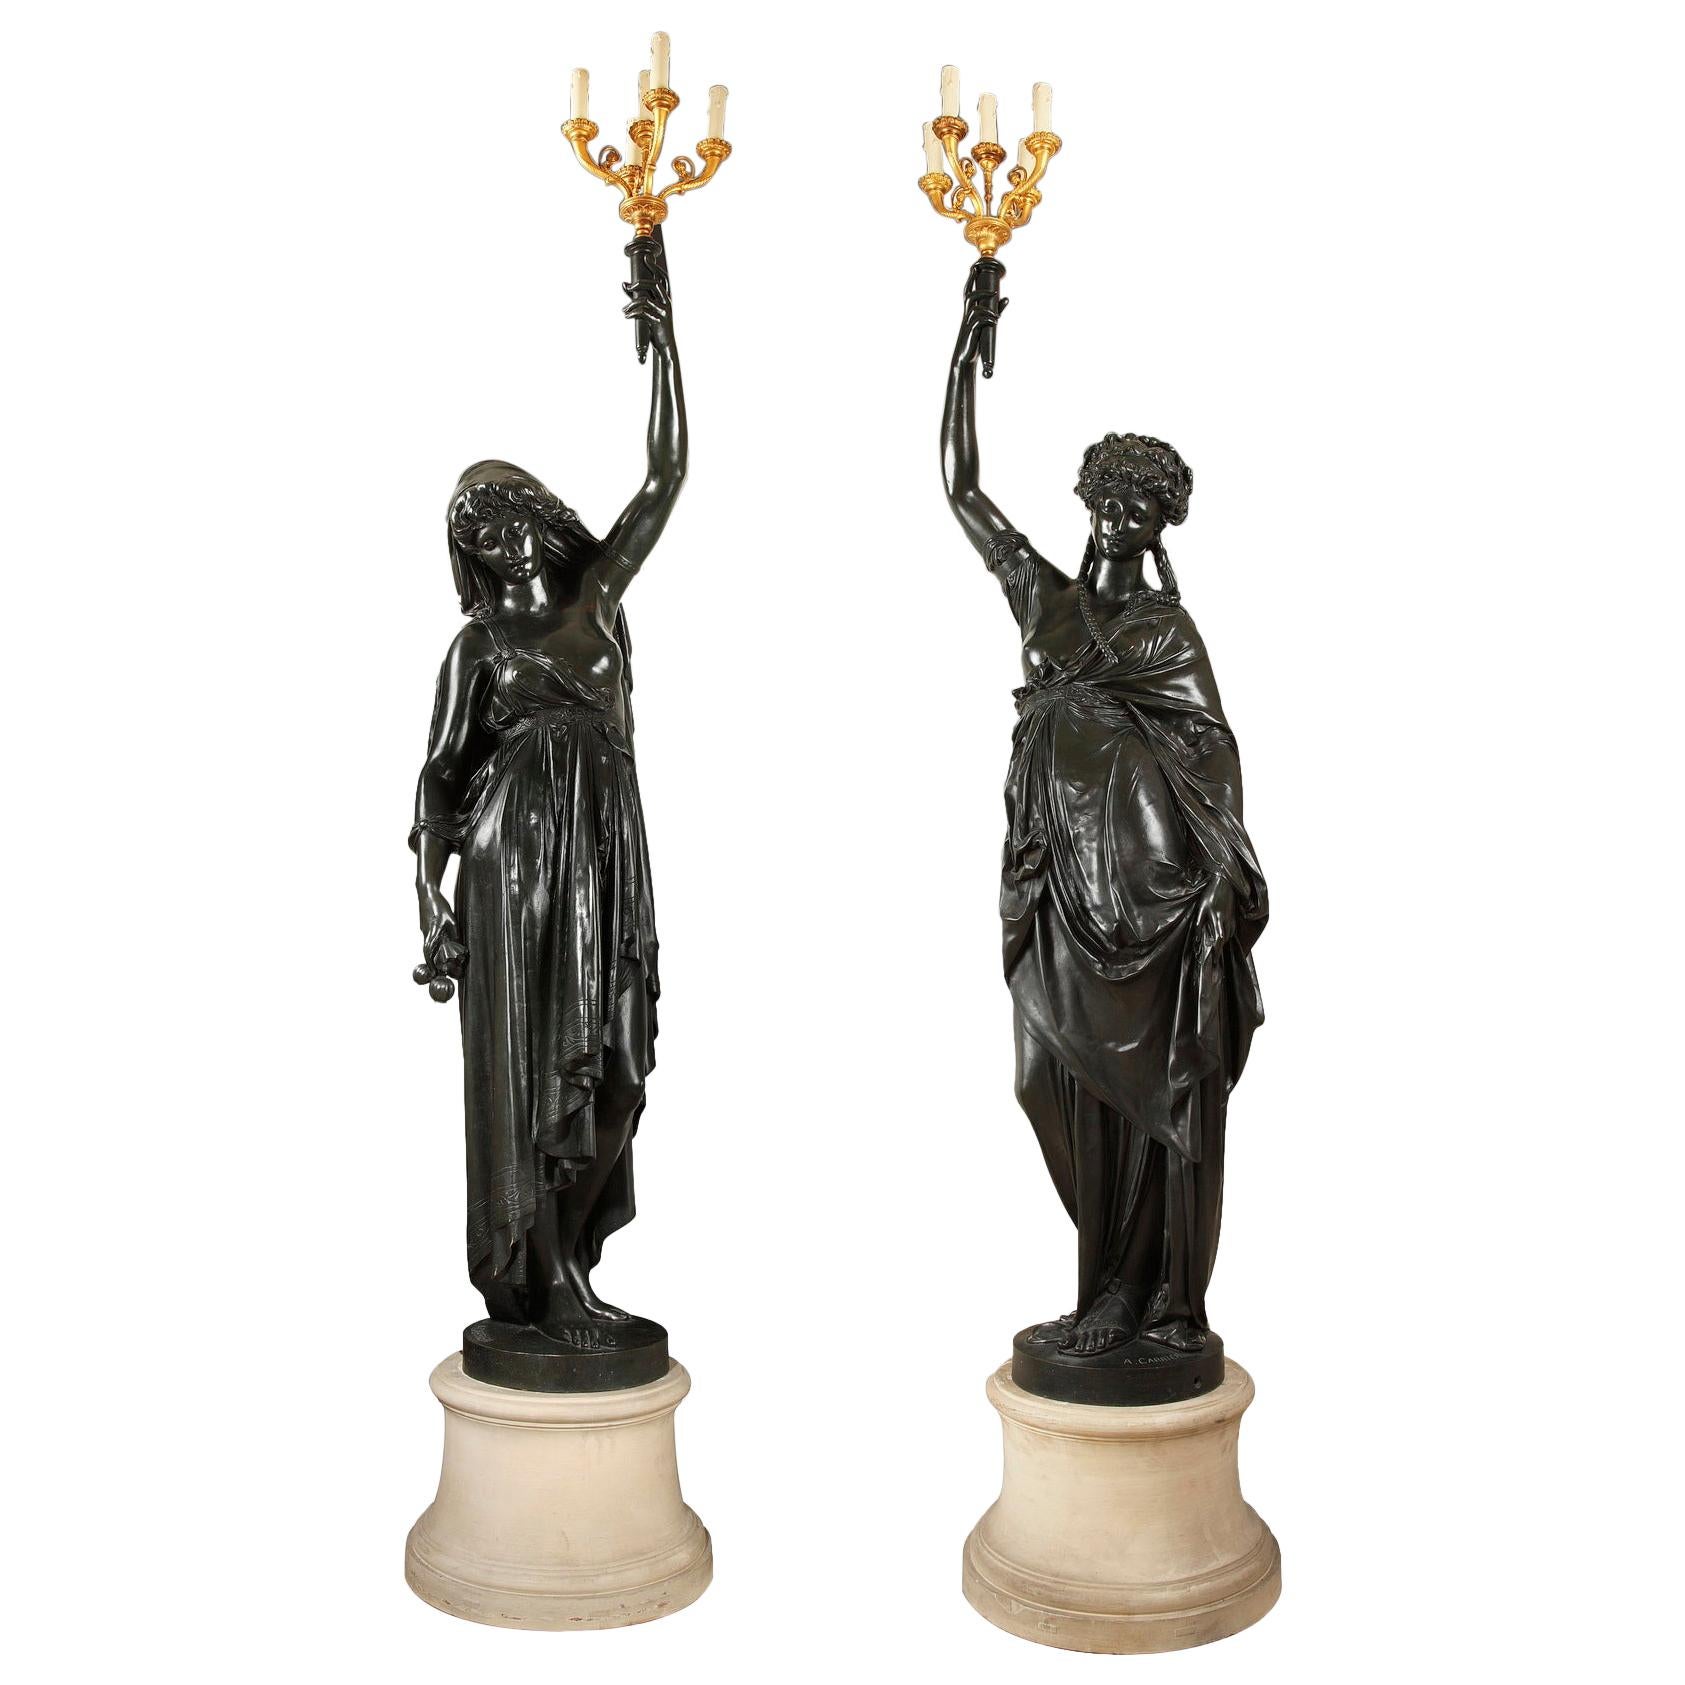 Pair of Bronze Torchères by E.Colin after a Model by A.Carrier, France, c. 1900